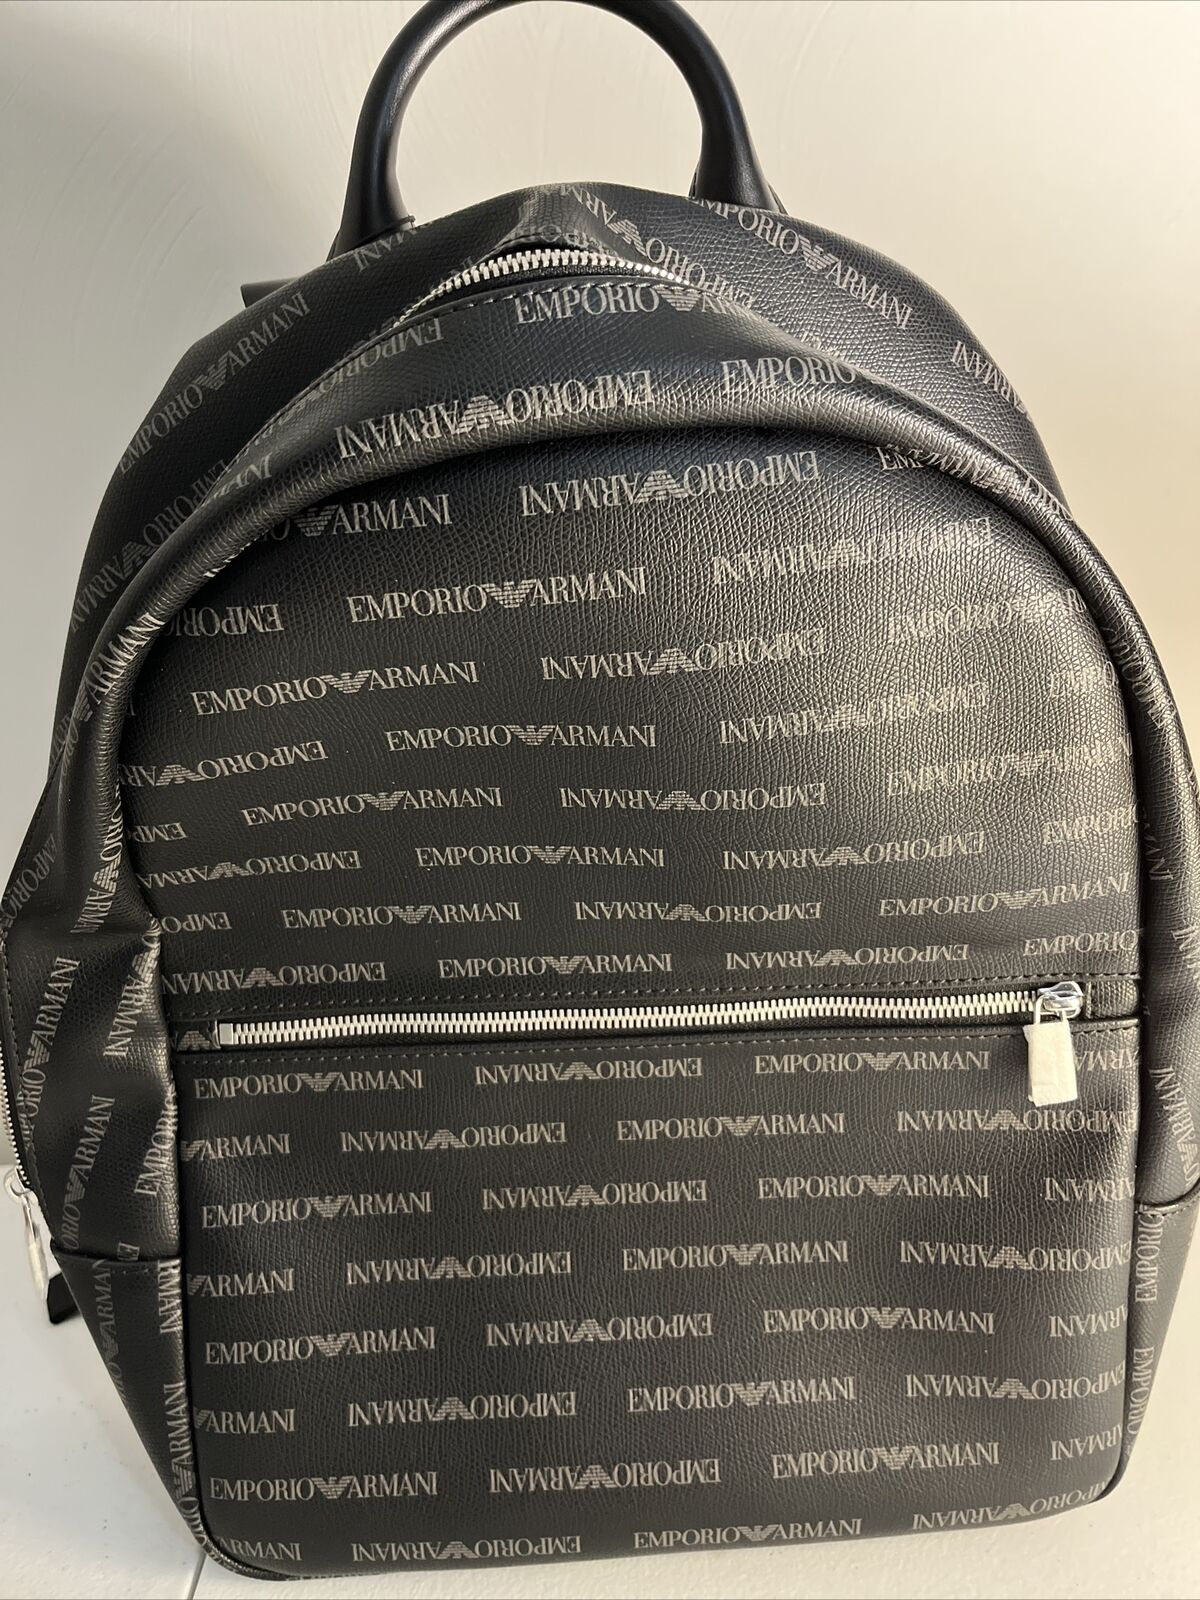 Authentic Emporio Armani Black Leather Monogram Backpack; New With Tags